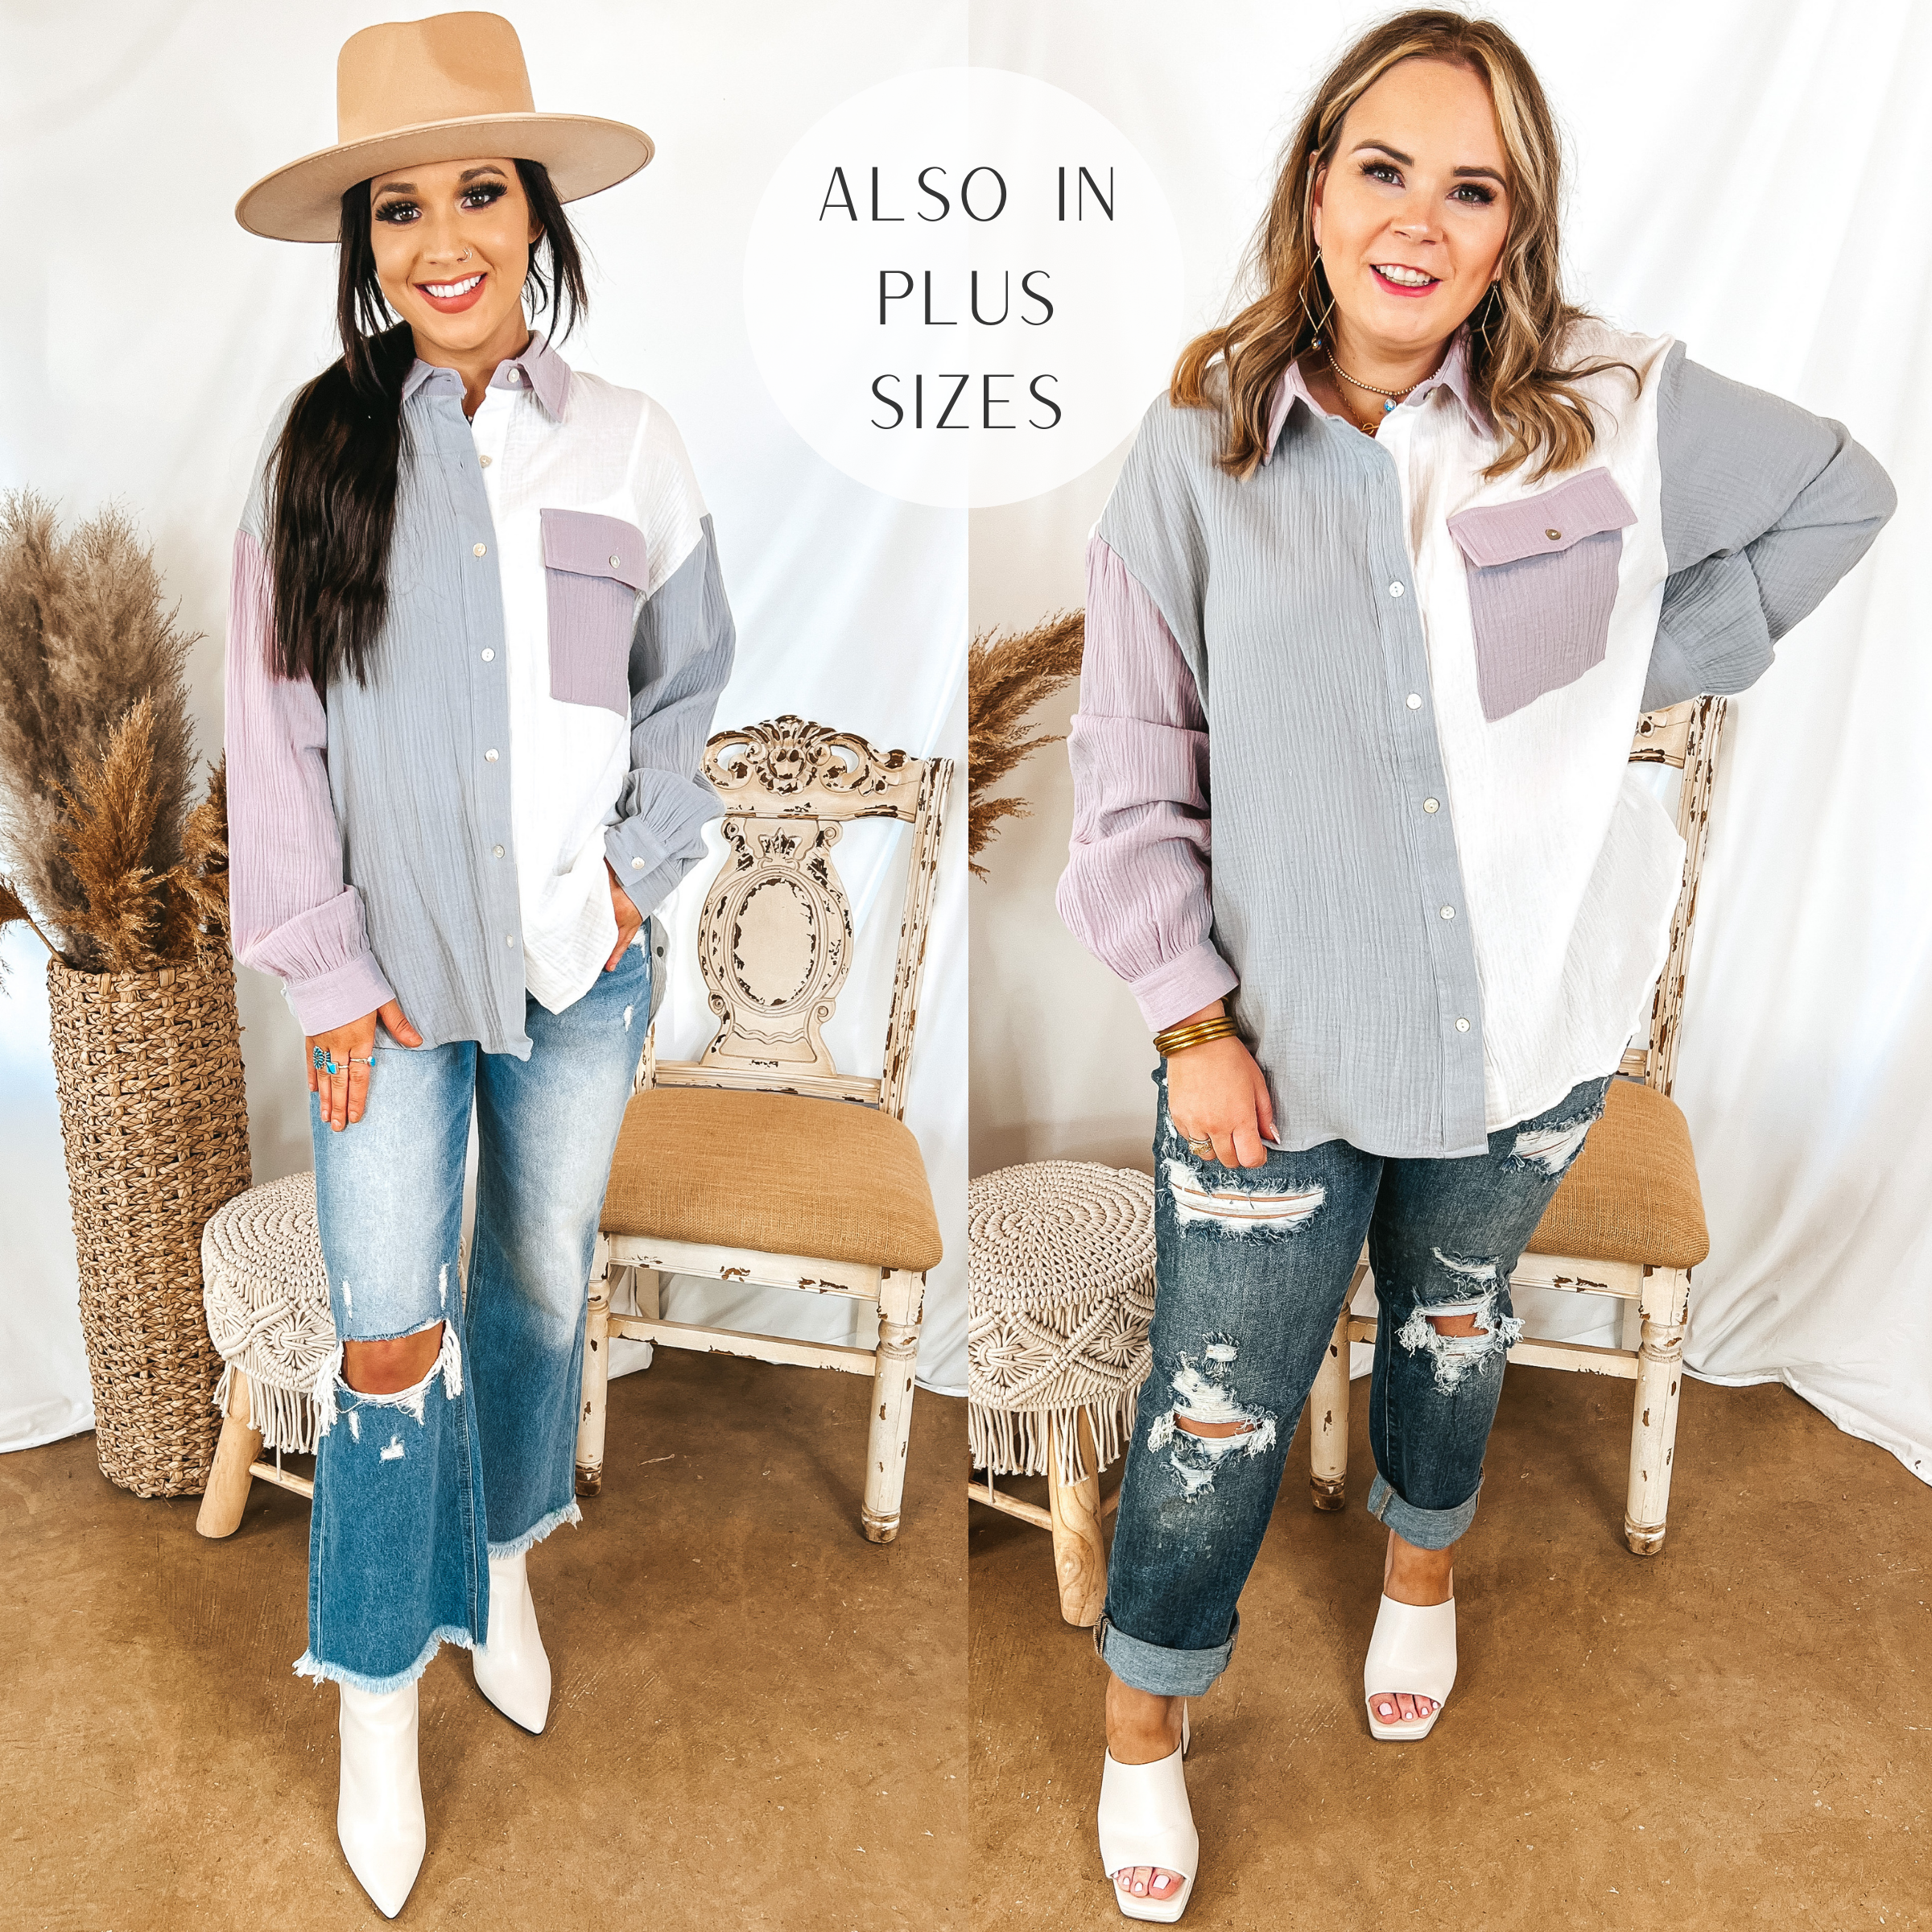 Models are wearing a purple, ivory, and blue colorblock button up top. Size small model has it paired with light wash cropped jeans, white booties, and a tan hat. Size large model has it paired with distressed dark wash jeans, white heels, and gold jewelry.